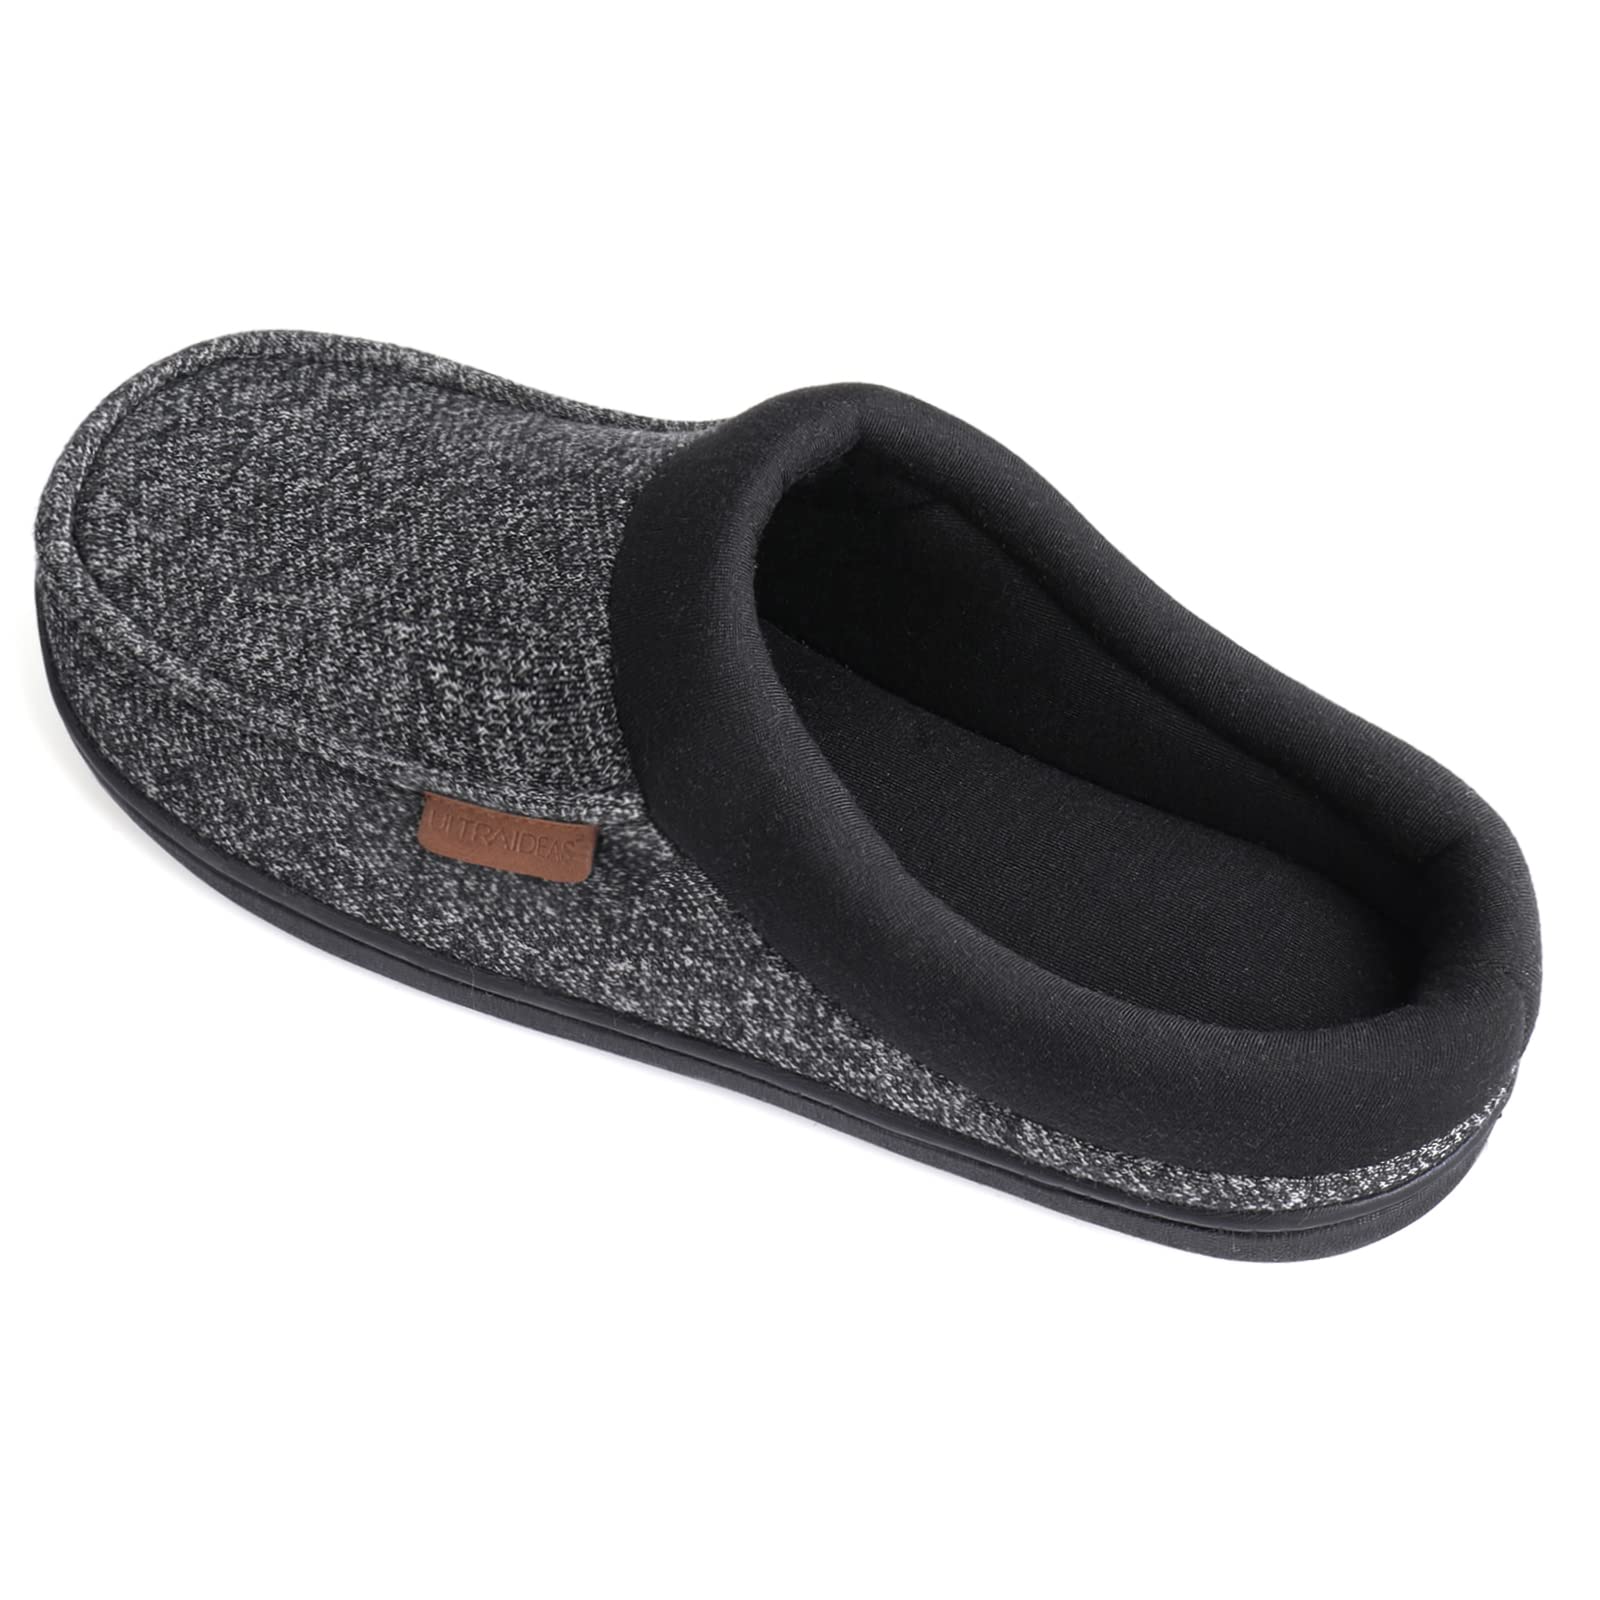 ULTRAIDEAS Men's Moccasin Slippers with Memory Foam Insole, Slip on House Slippers, Warm Faux Sherpa Lining House Shoes Clog with Nonslip Rubber Sole for Indoor & Outdoor